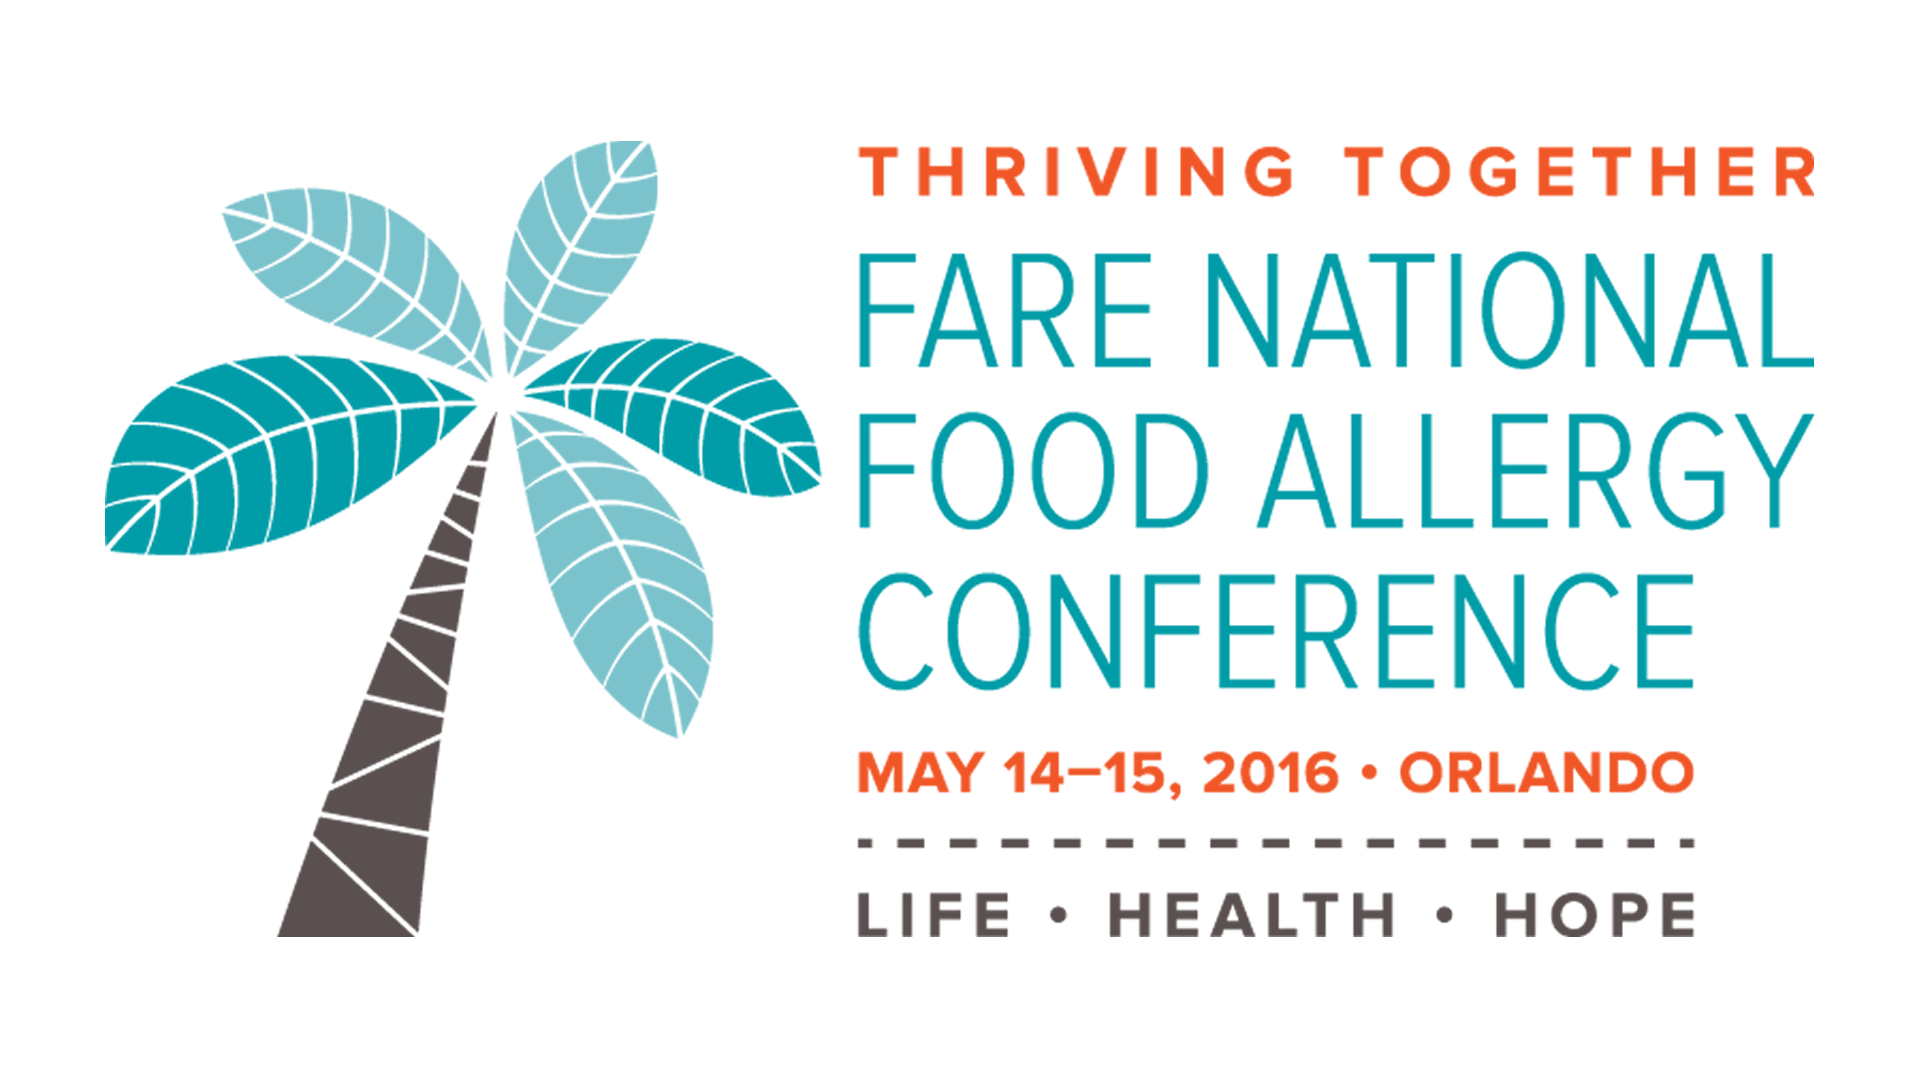 FARE National Food Allergy Conference Brings Together Experts, Families